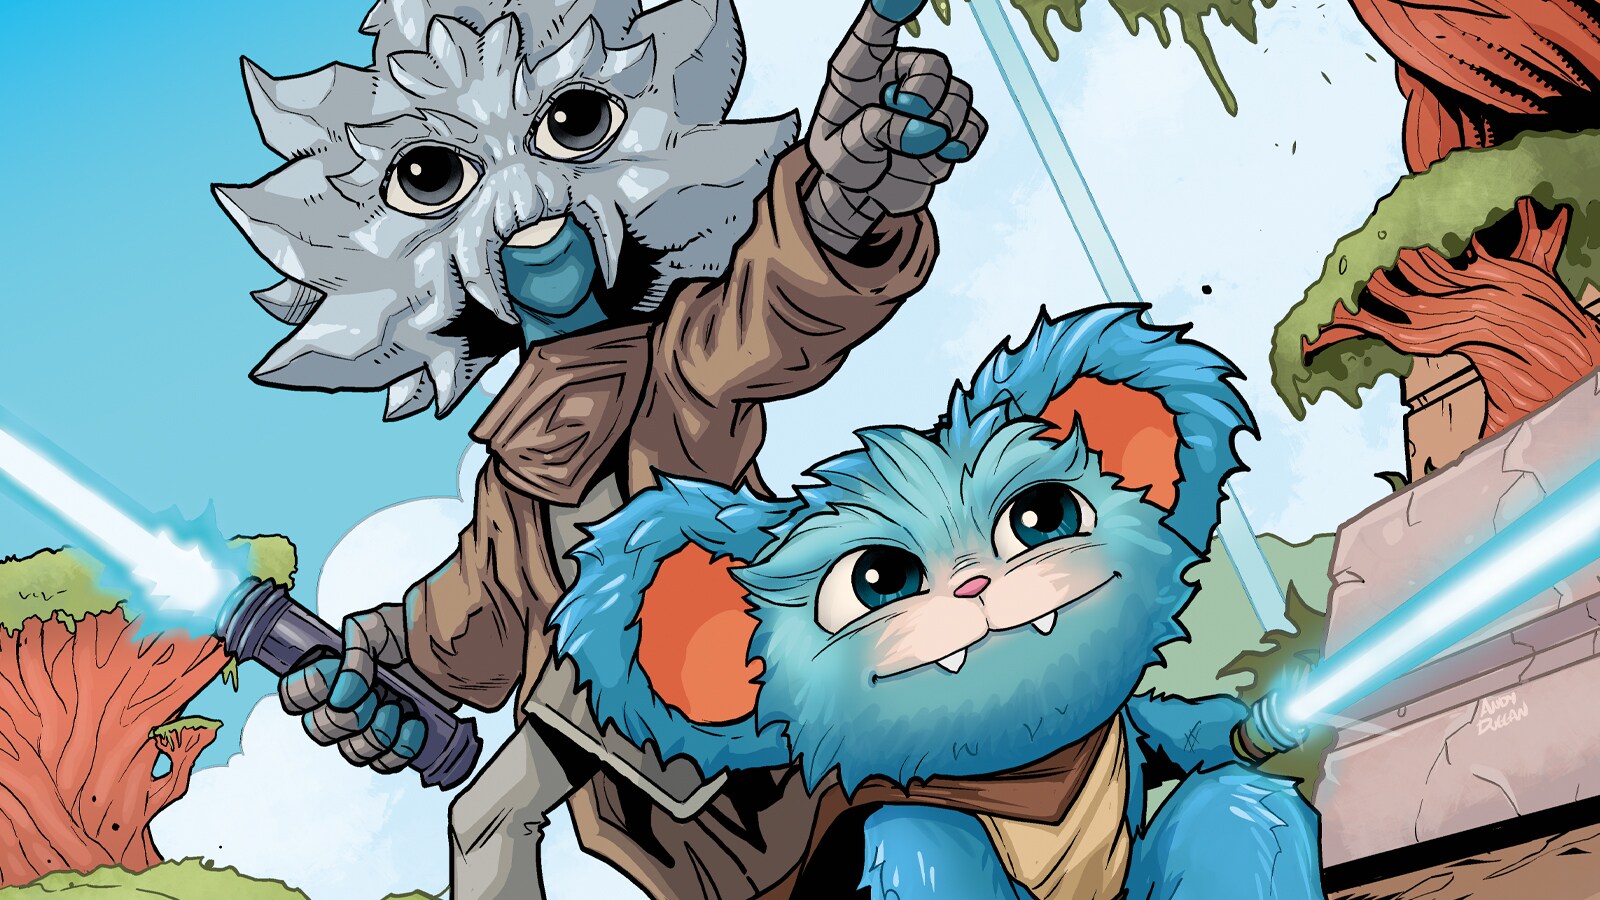 Younglings Meet the Big Kids in Dark Horse’s Young Jedi Adventures Tale for Free Comic Book Day – Exclusive